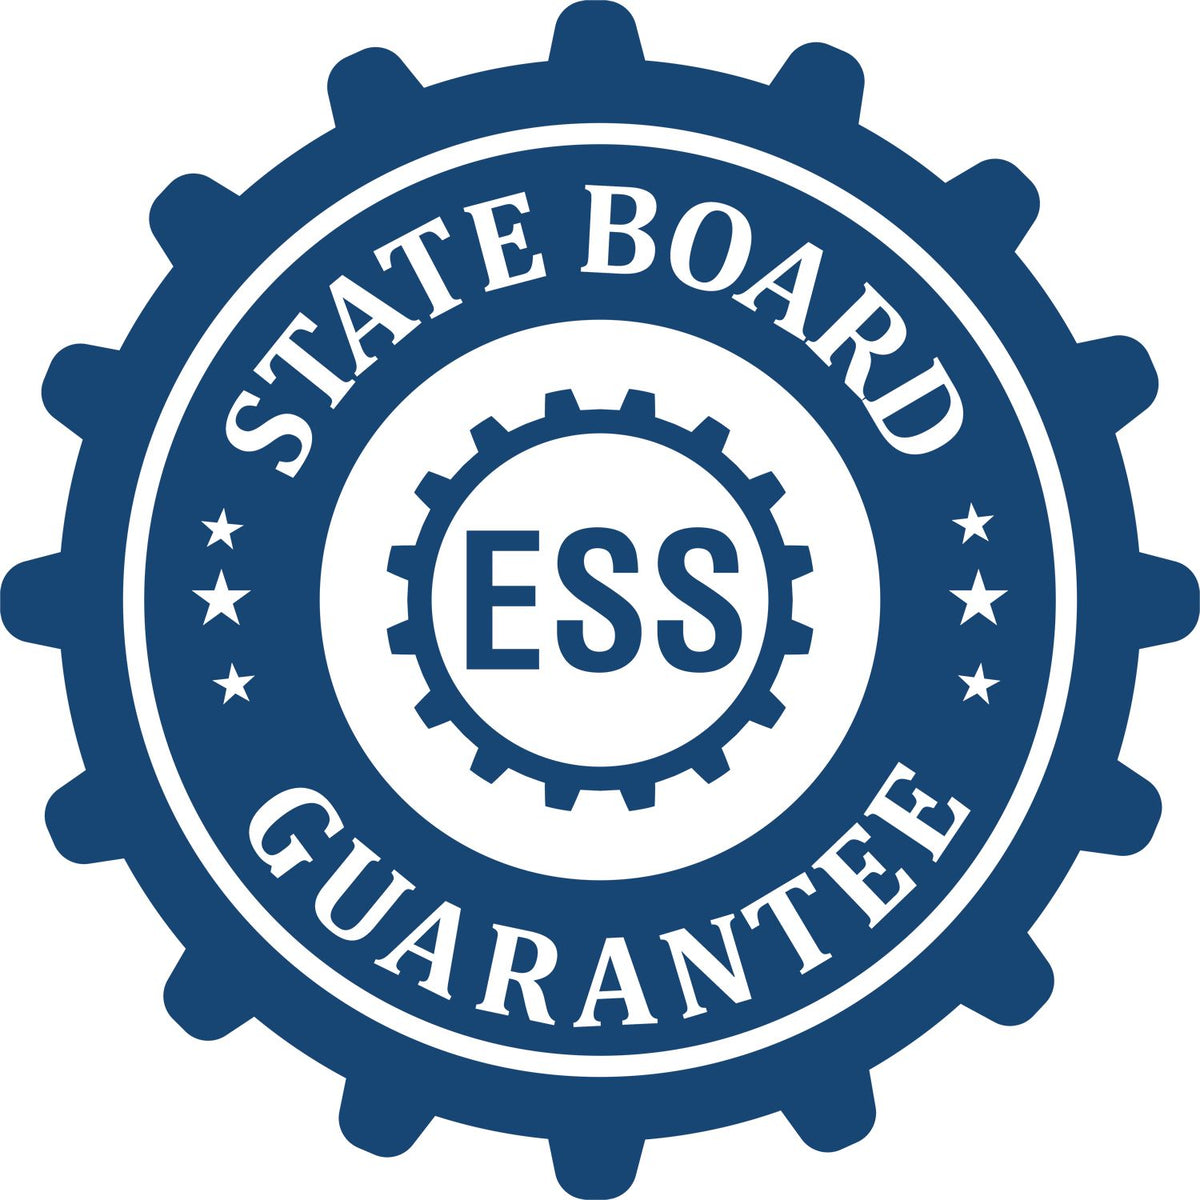 An emblem in a gear shape illustrating a state board guarantee for the Michigan Desk Architect Embossing Seal product.